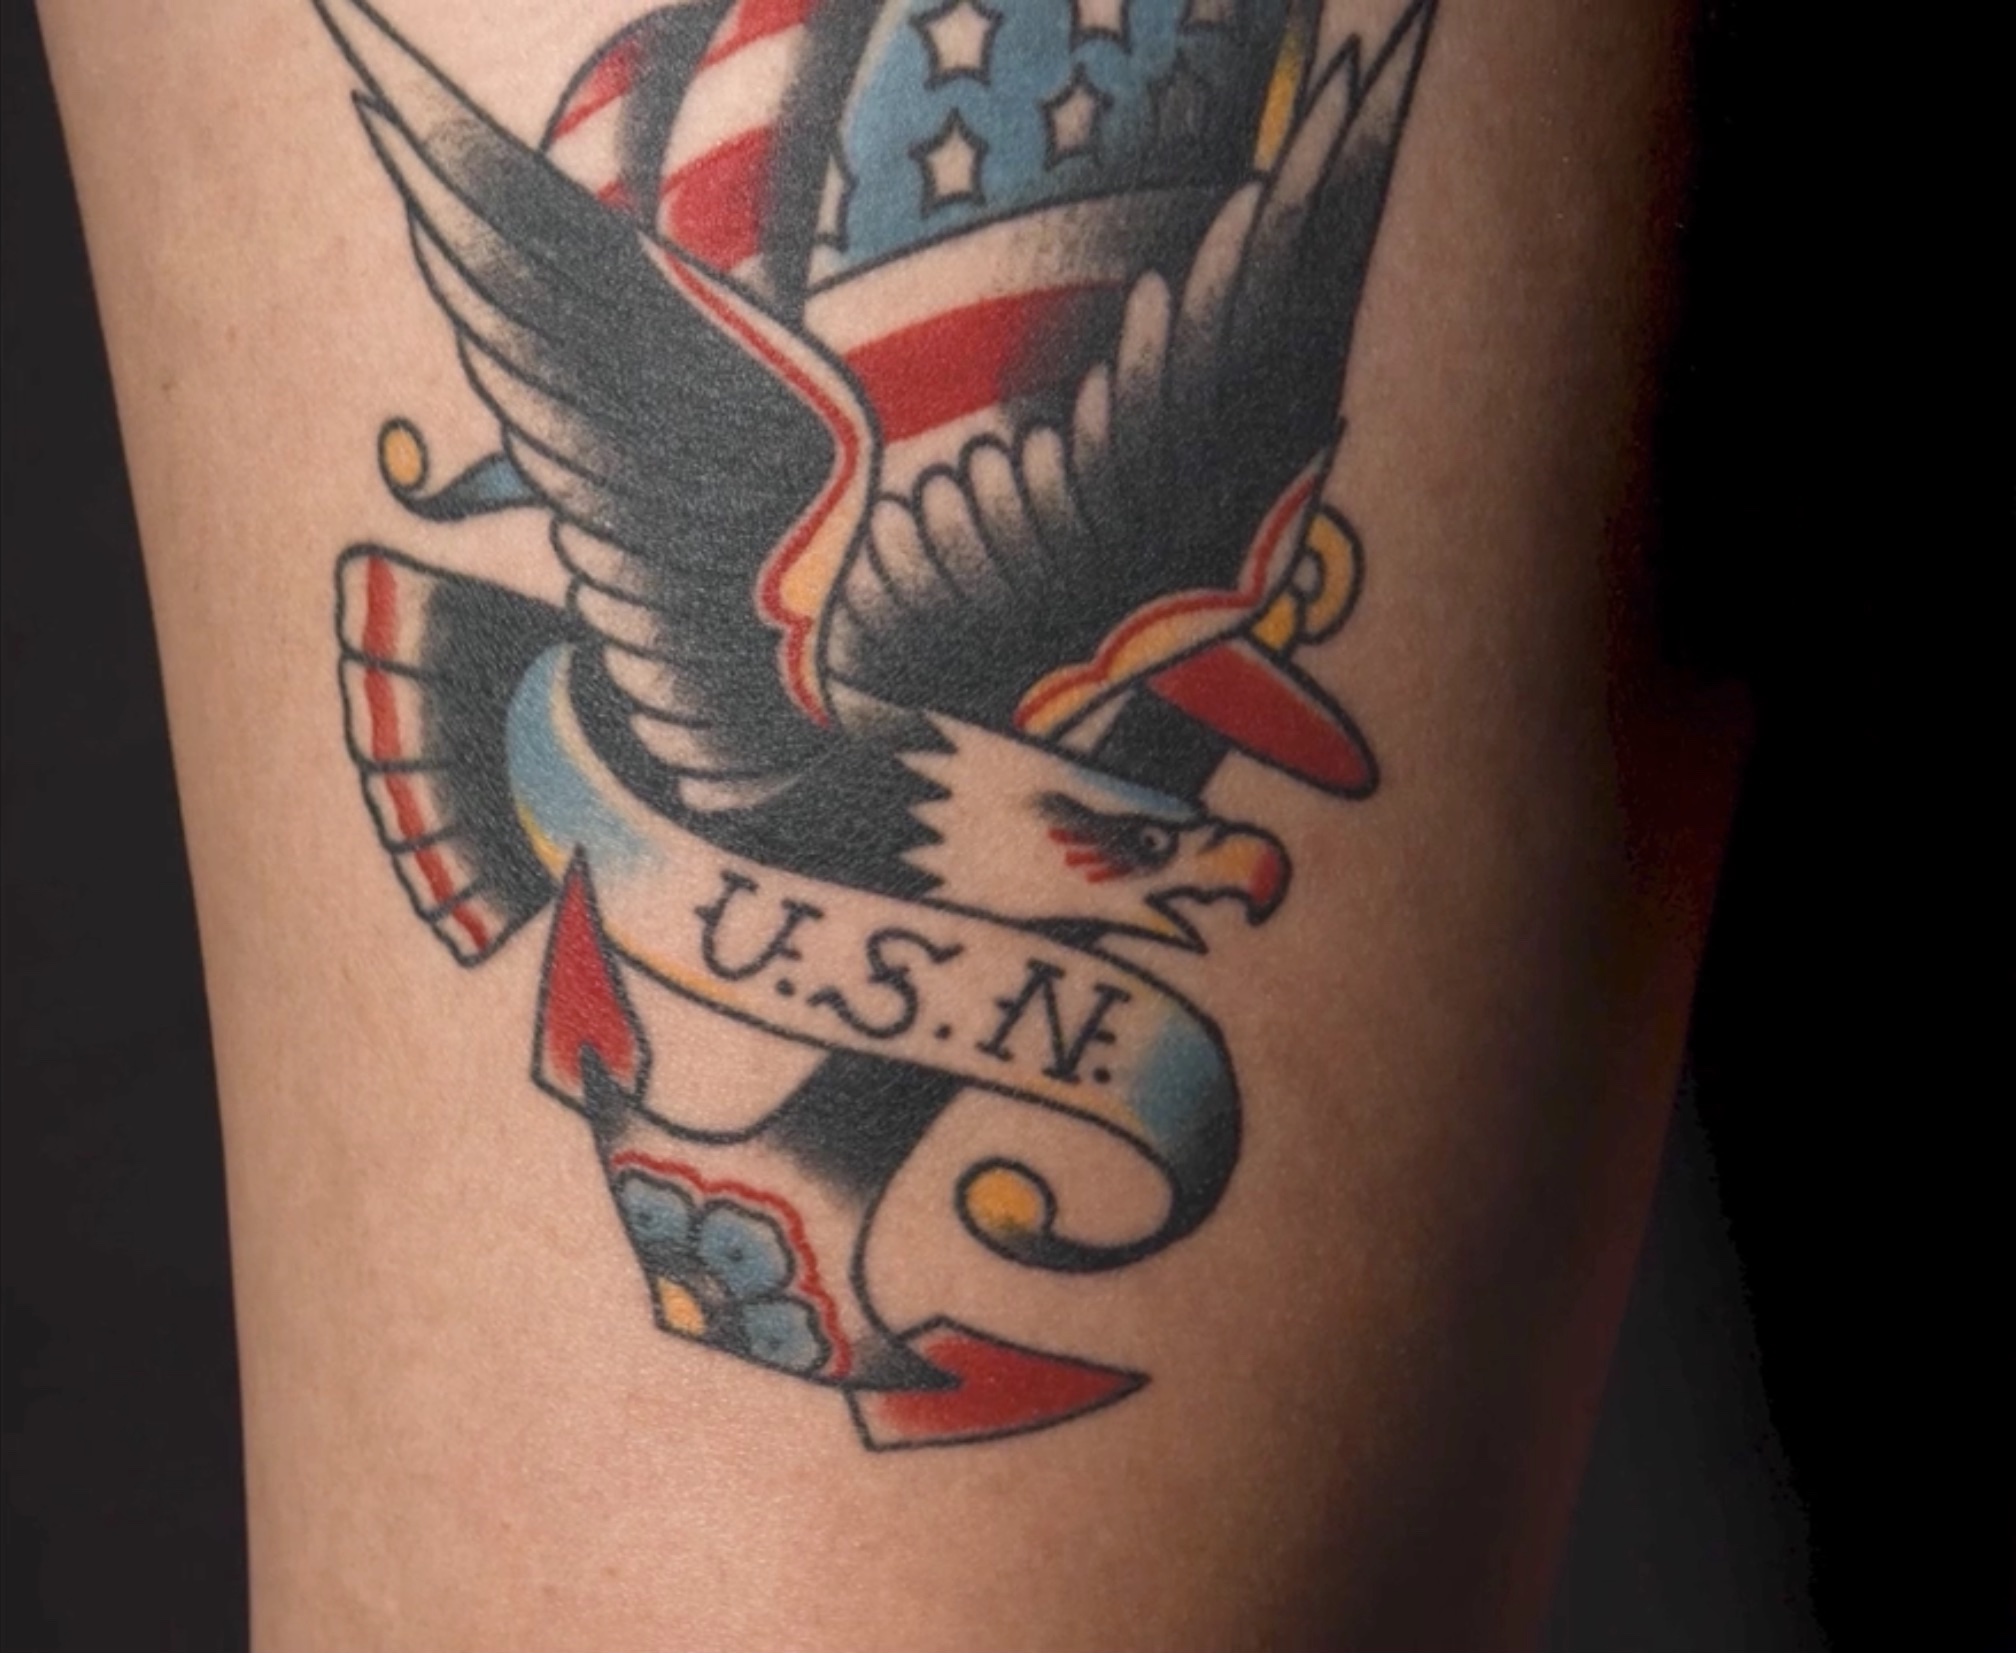 Aggregate more than 184 navy tattoos super hot